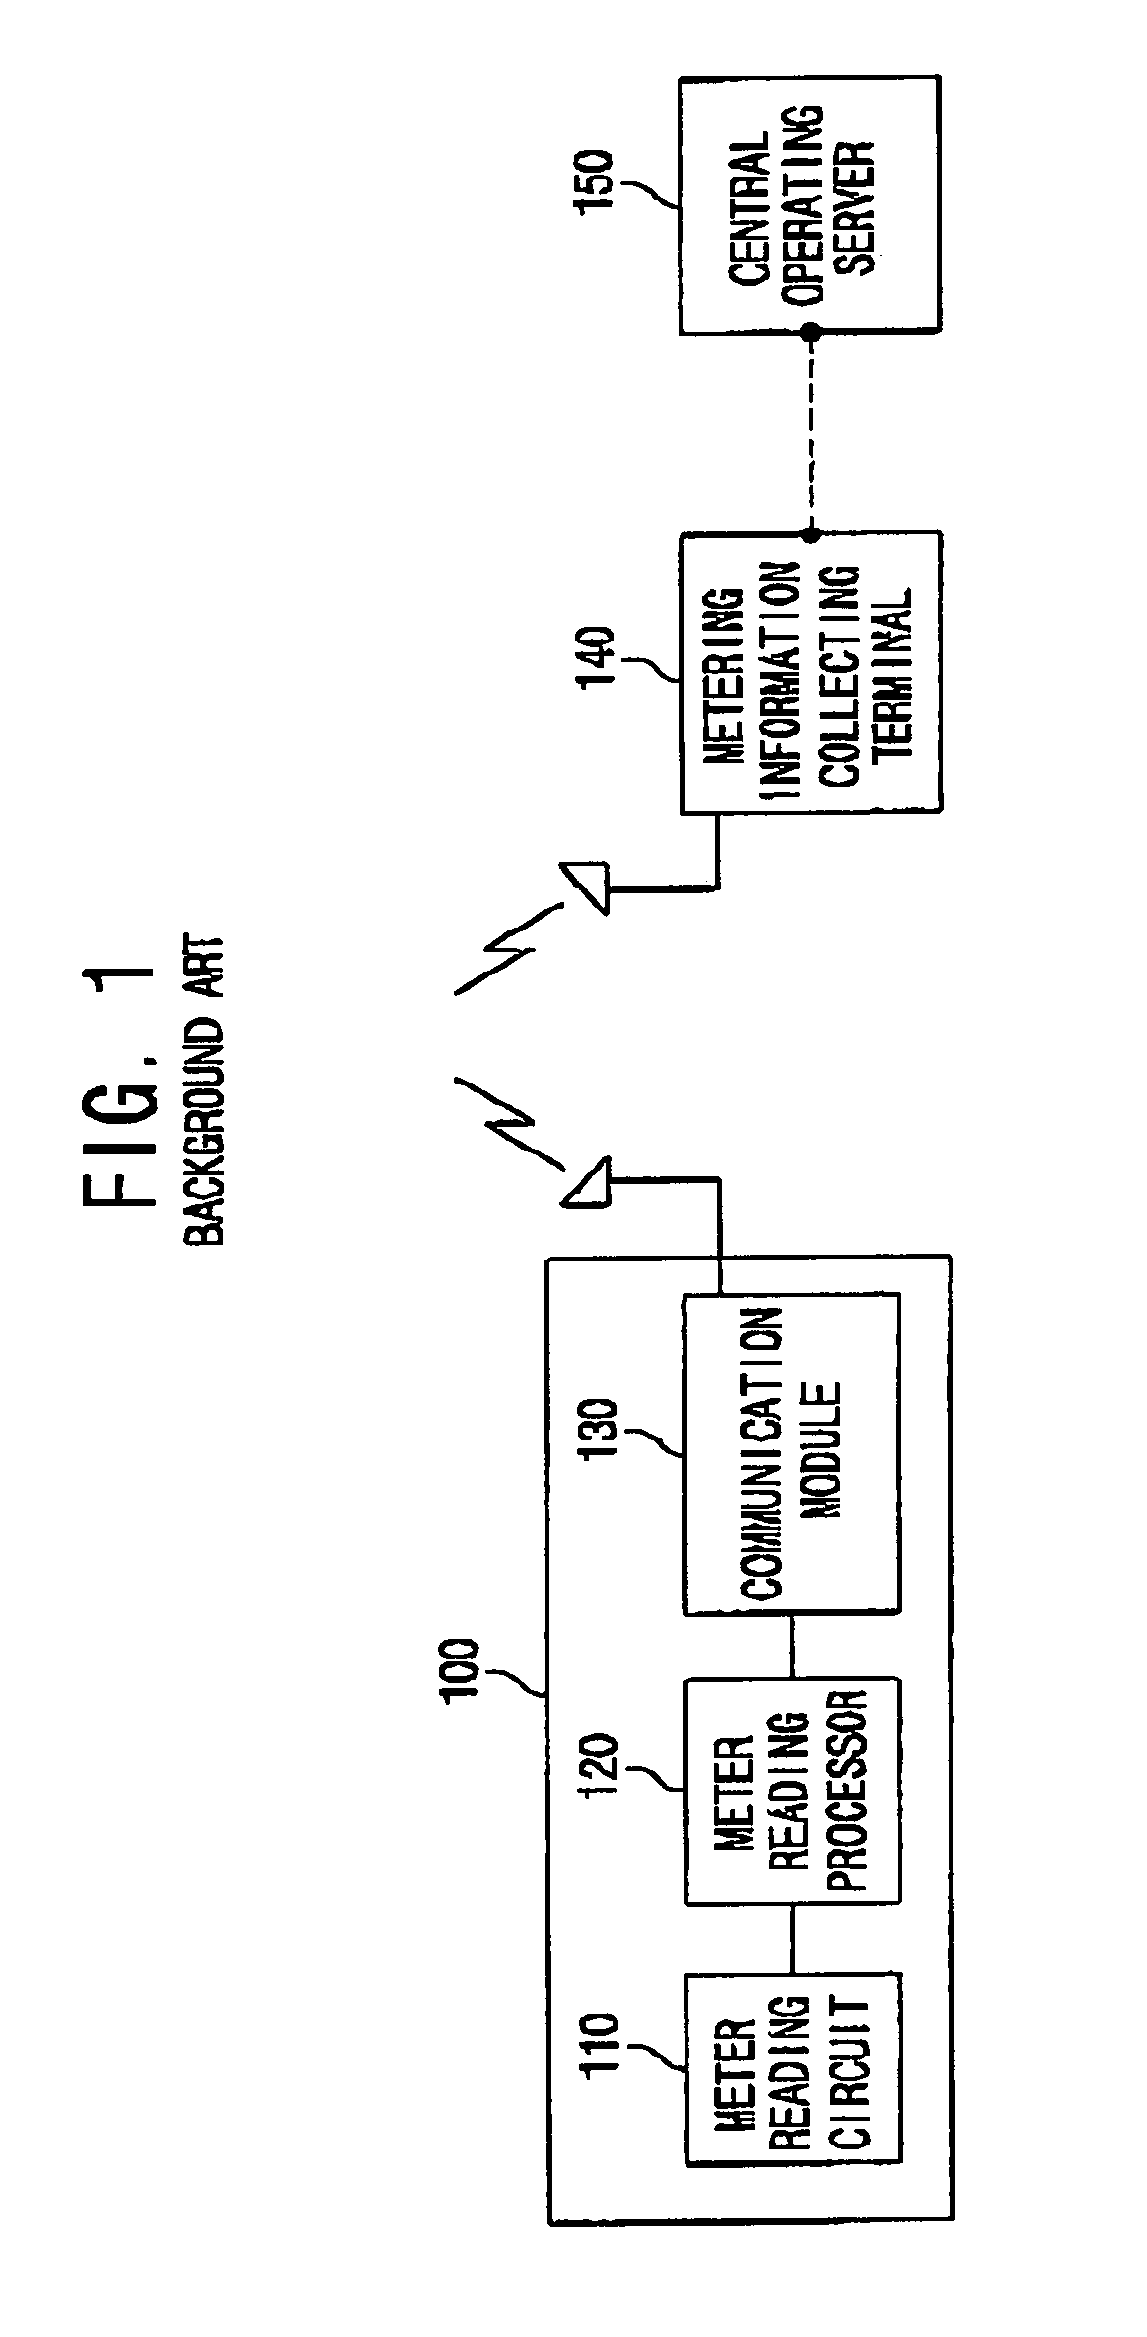 Mobile communication-based remote meter reading system and method